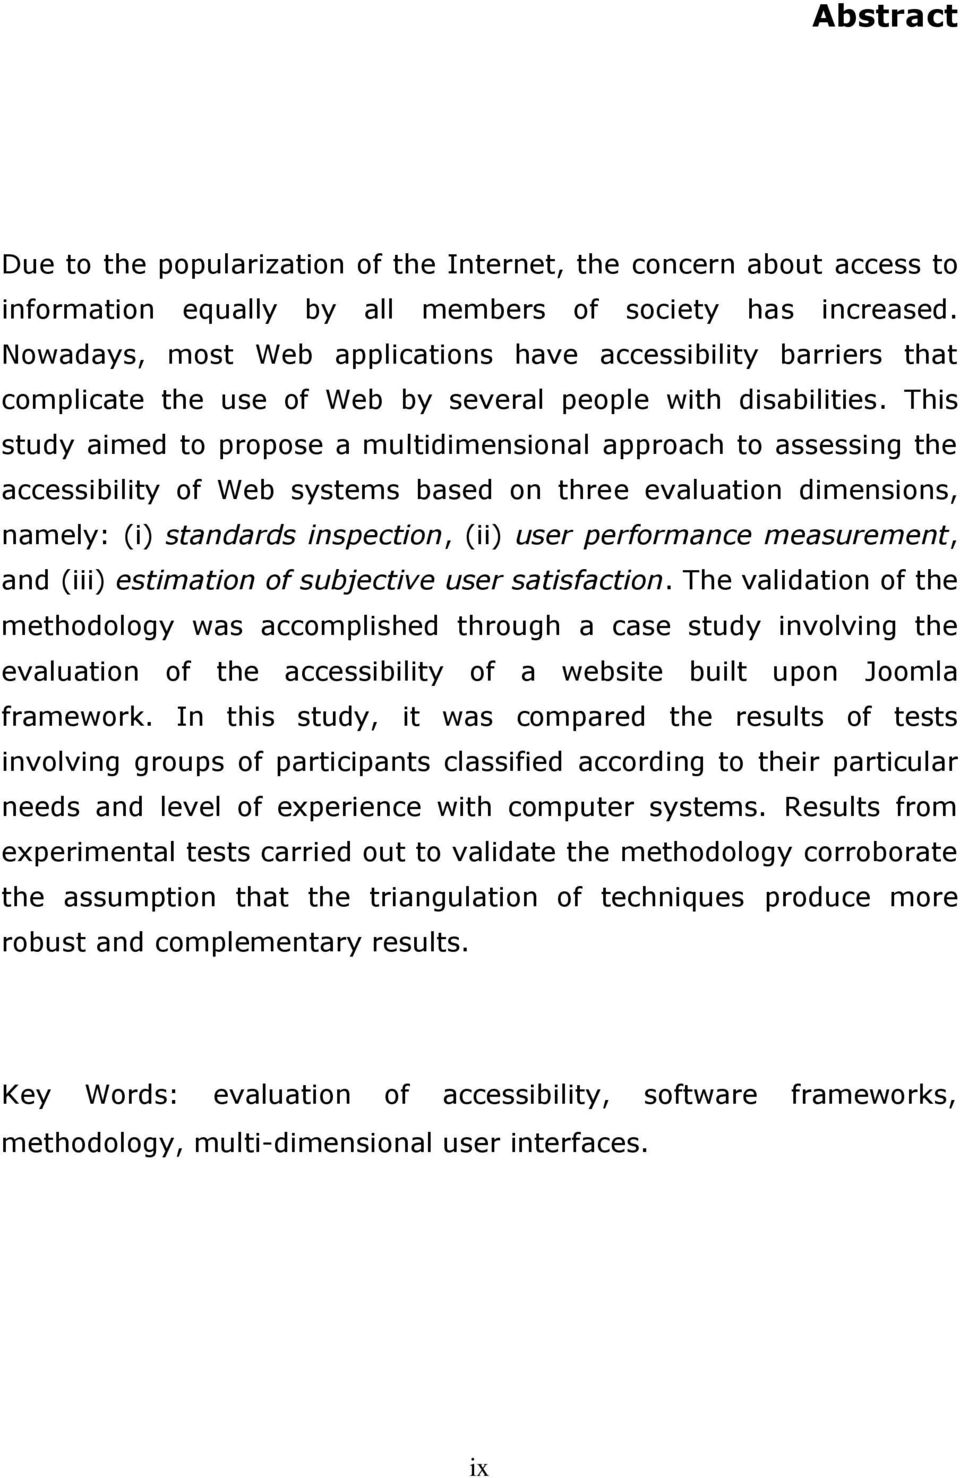 This study aimed to propose a multidimensional approach to assessing the accessibility of Web systems based on three evaluation dimensions, namely: (i) standards inspection, (ii) user performance